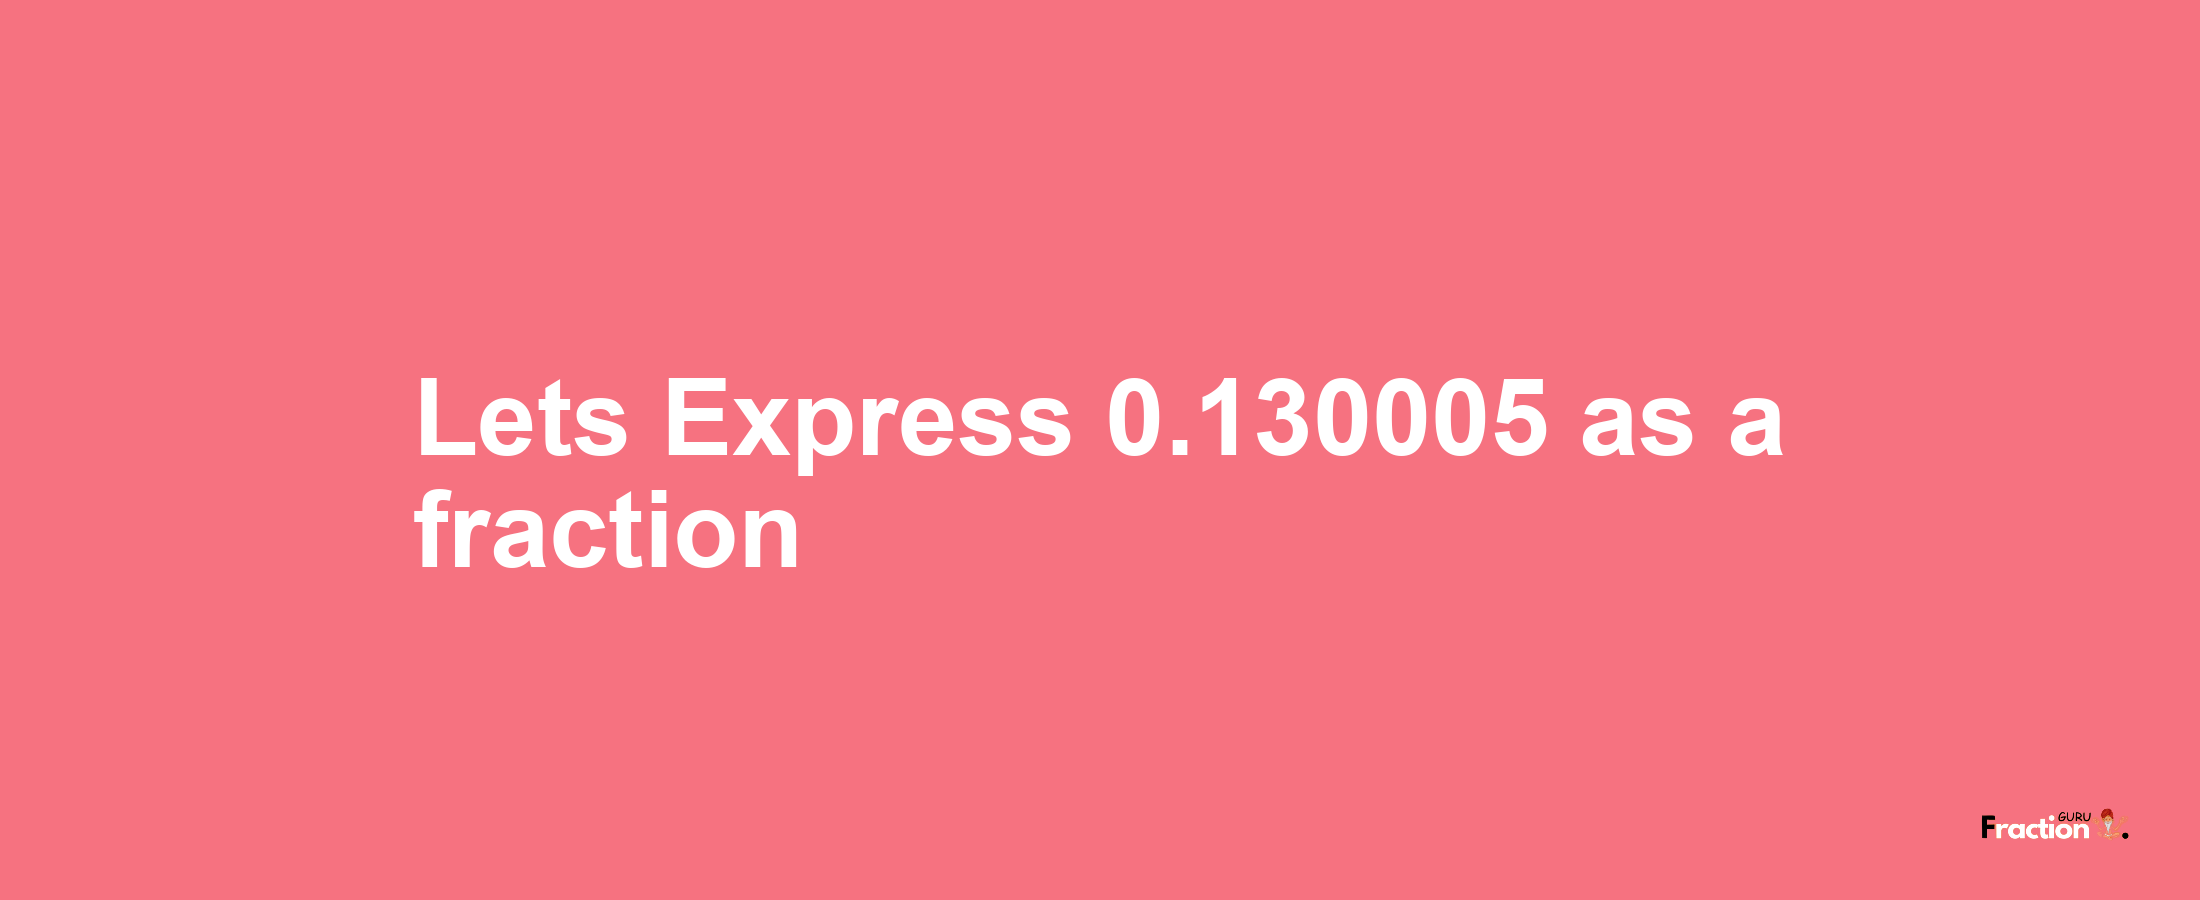 Lets Express 0.130005 as afraction